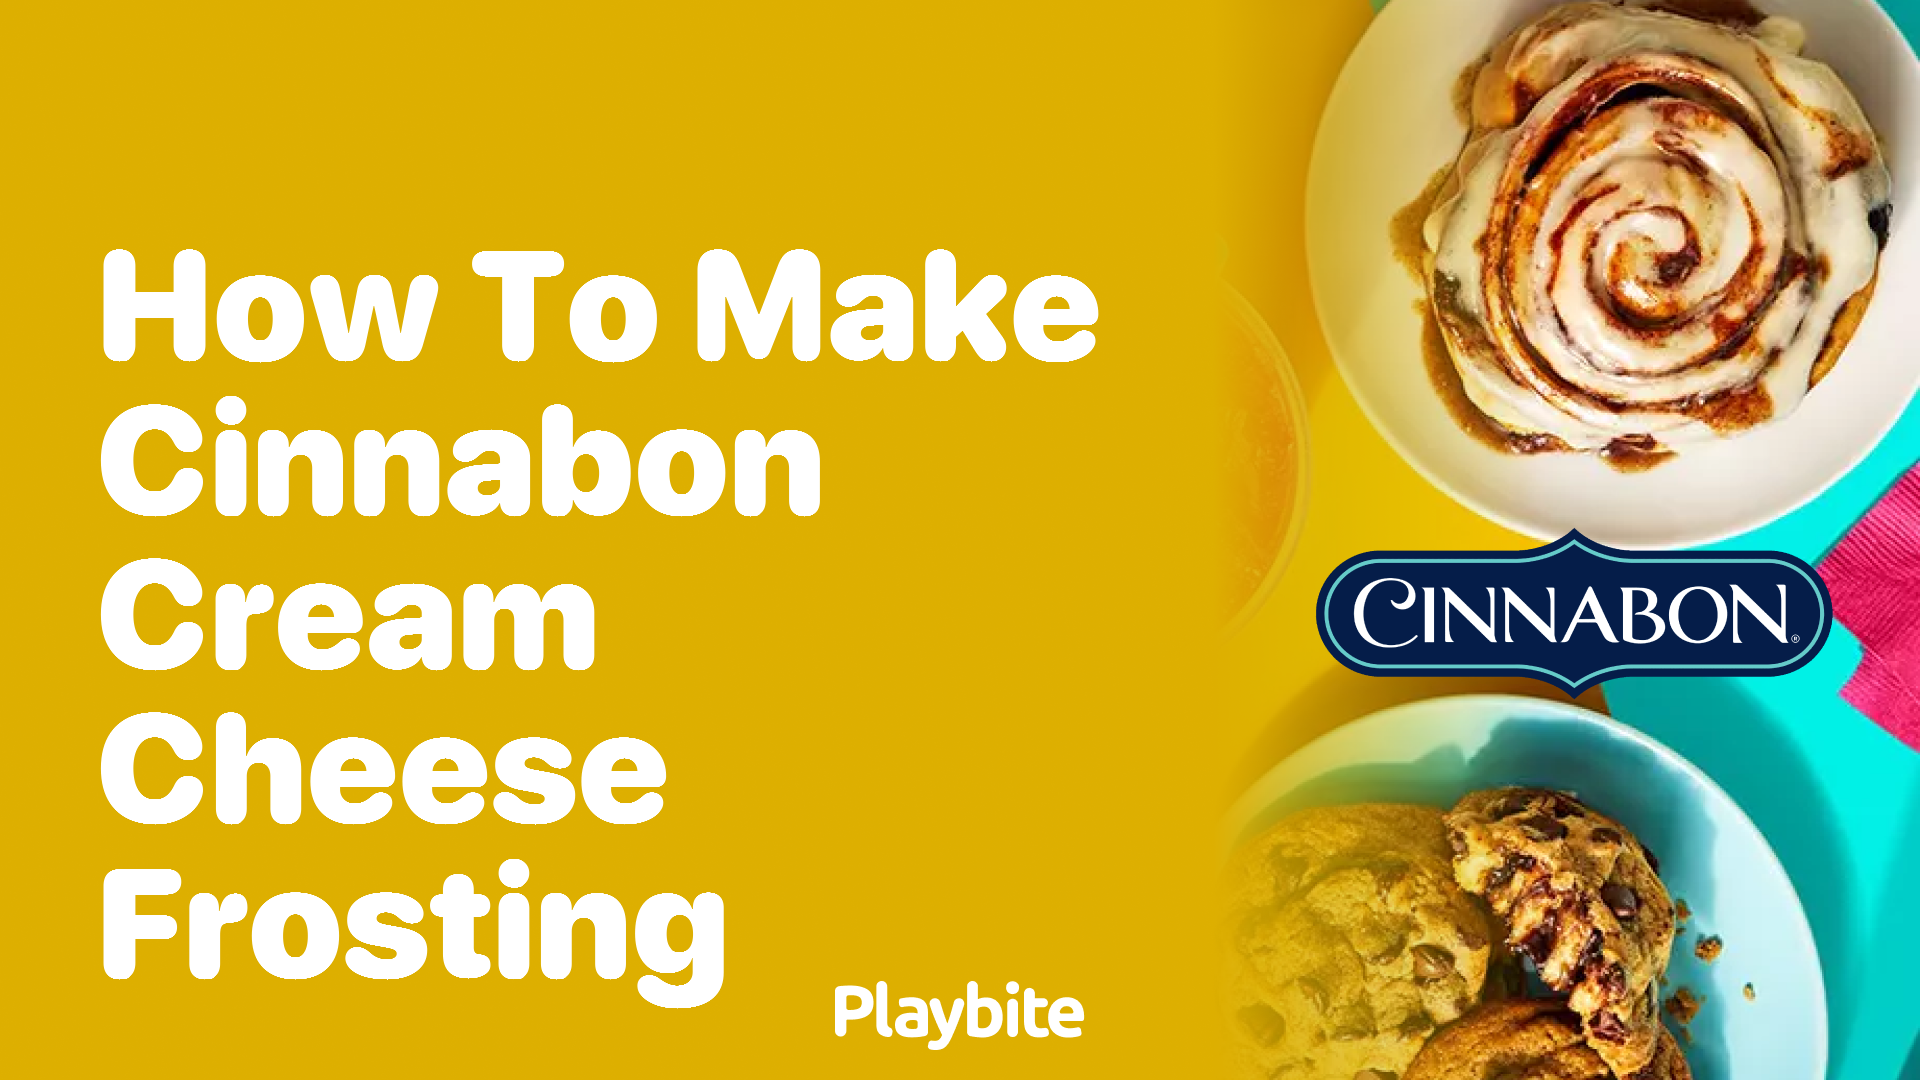 How to Make Cinnabon Cream Cheese Frosting